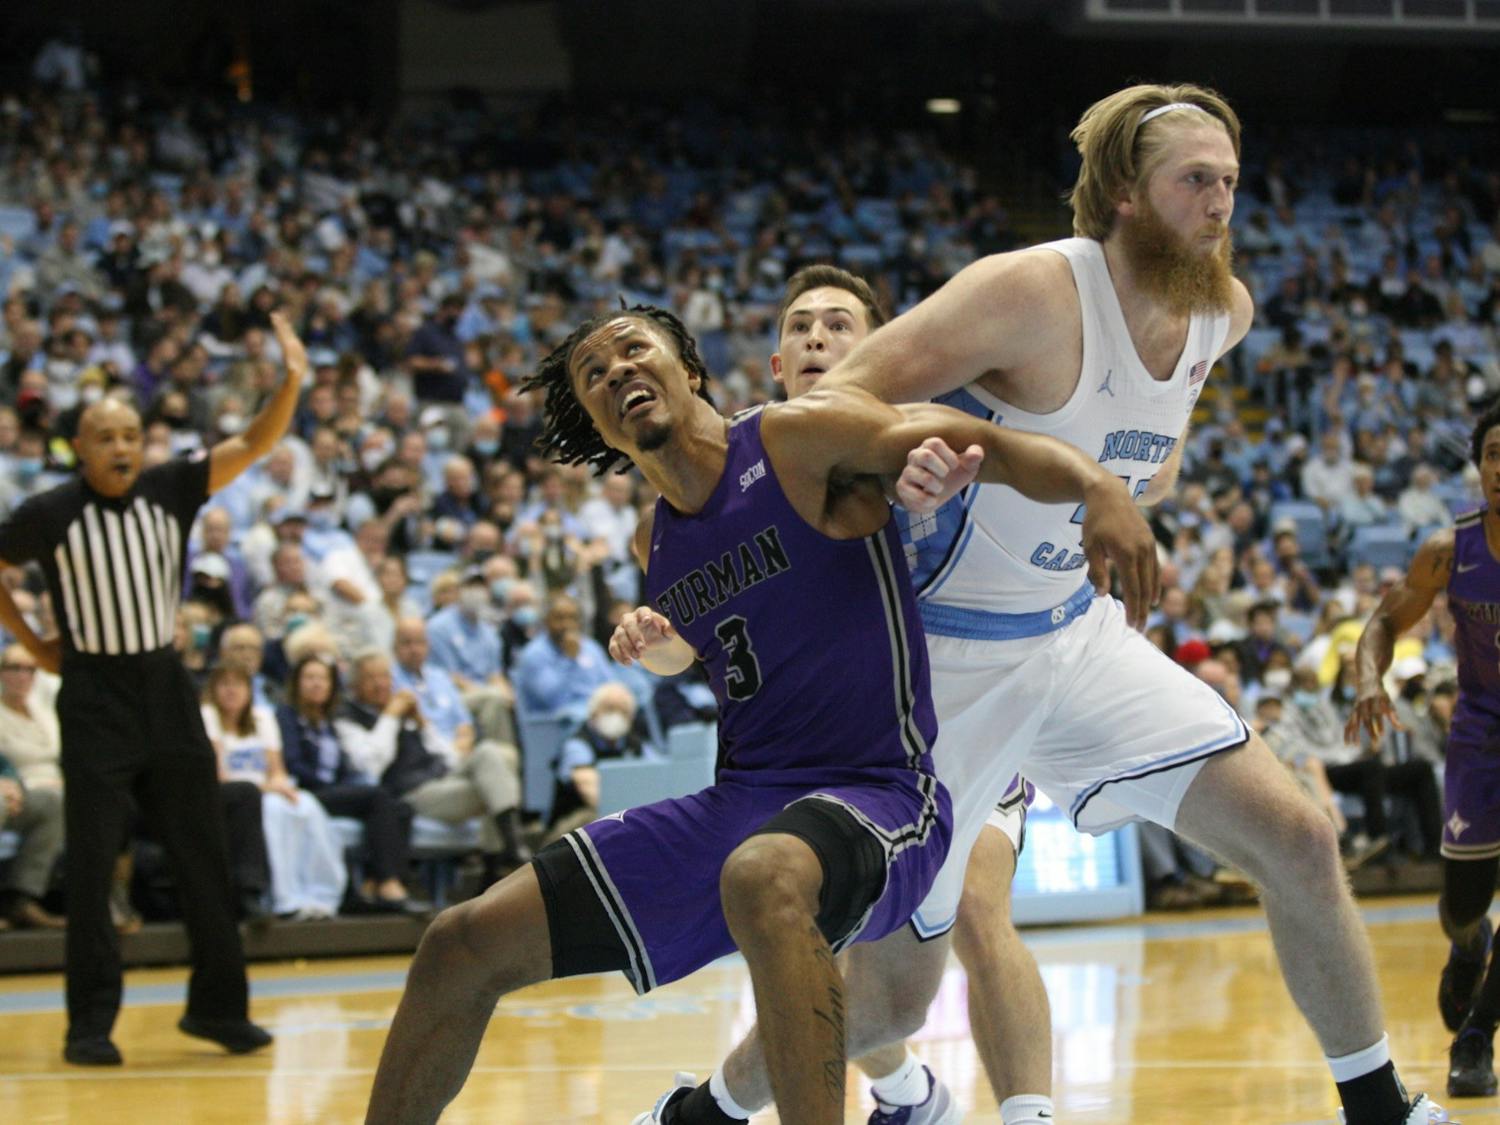 UNC graduate forward Brady Manek (45) fights for position under the basket during a home game at the Dean Smith Center against Furman on Tuesday, Dec. 14, 2021.